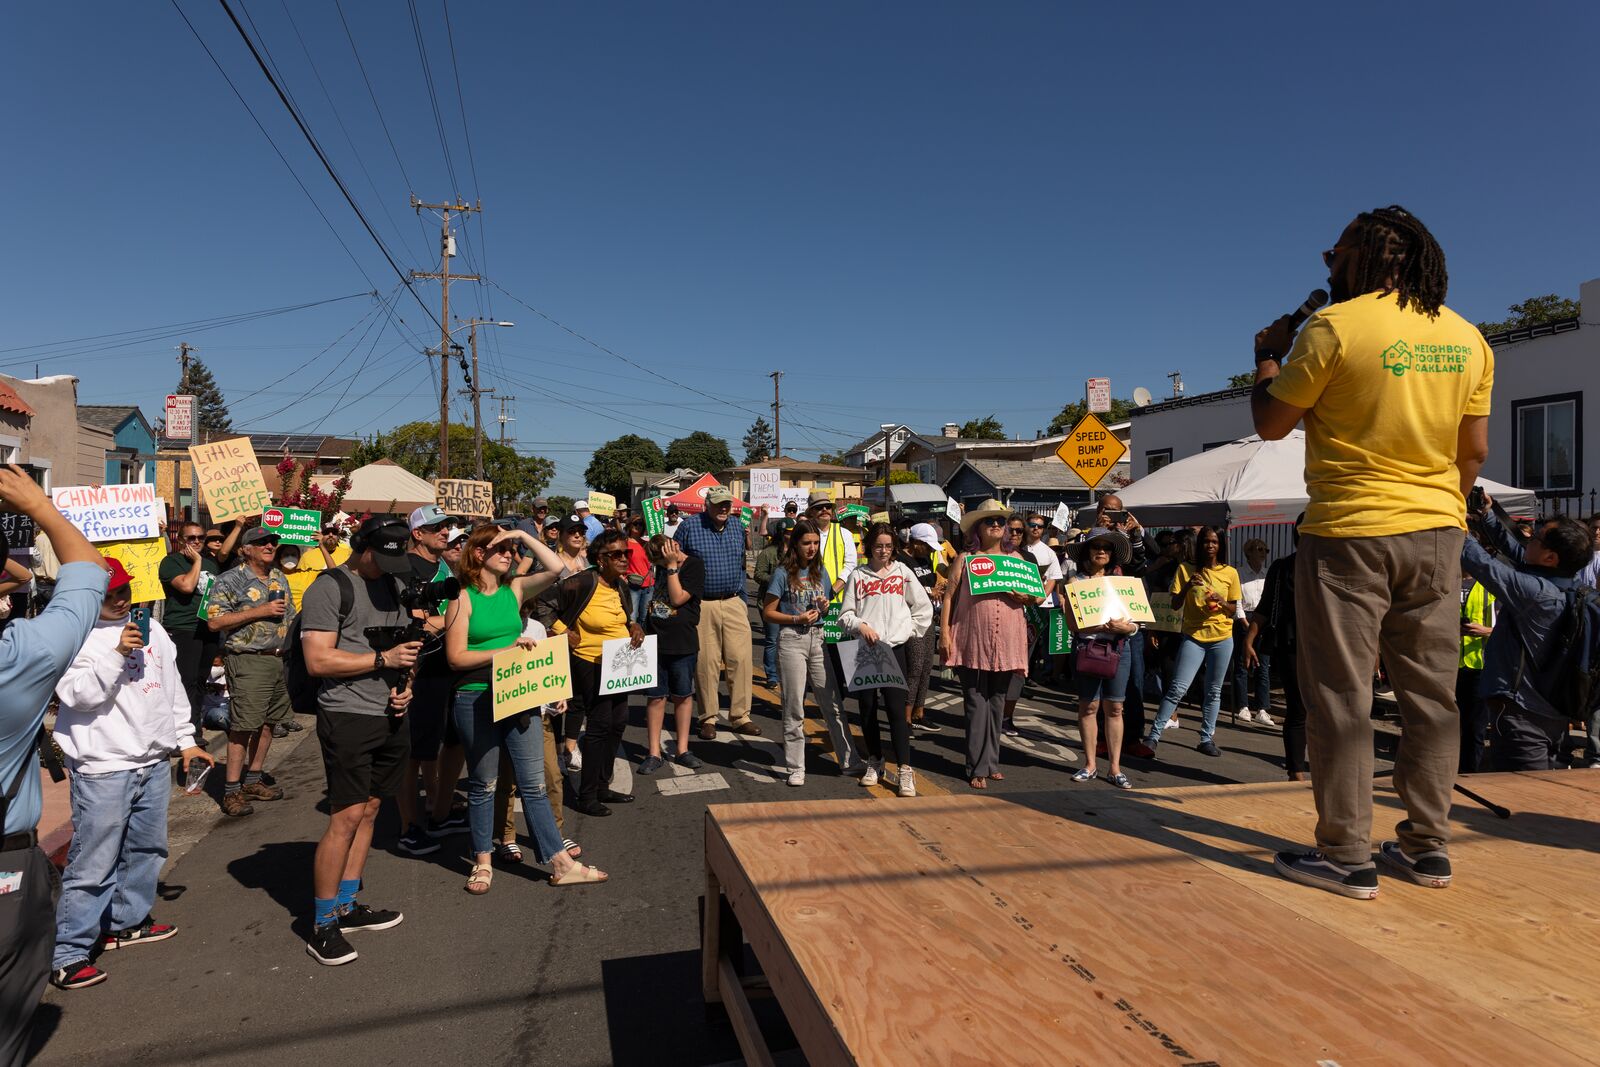 A man in a yellow shirt holding a microphone speaks to a crowdd of people, many of whom are wearing hats and sunglasses and carrying signs.